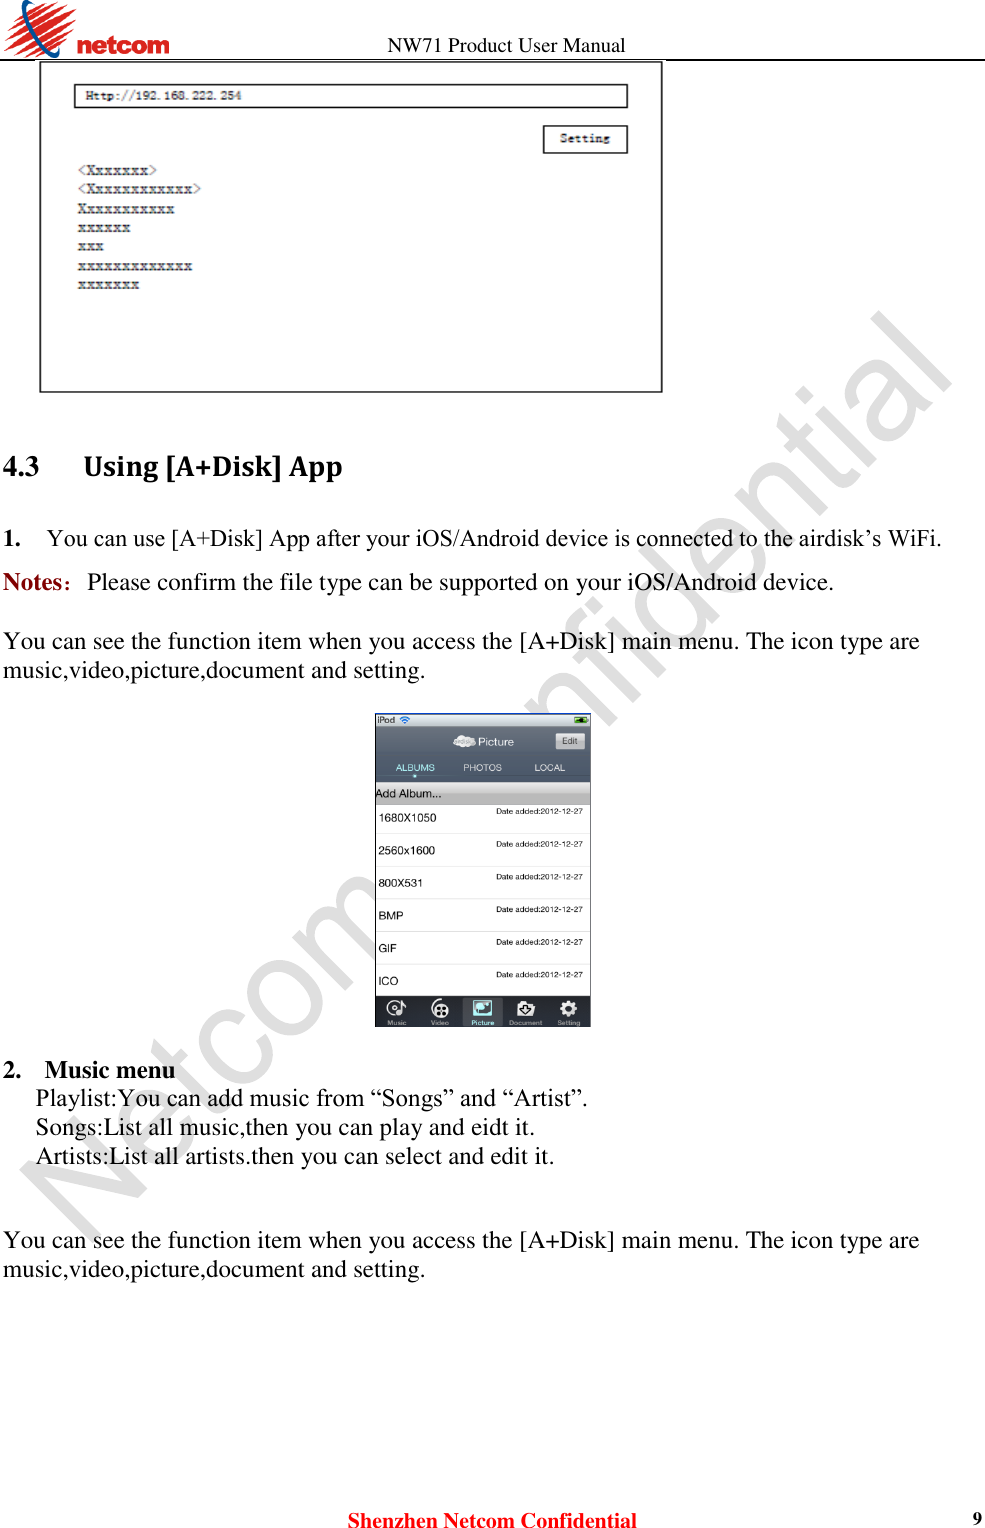                   NW71 Product User Manual Shenzhen Netcom Confidential 9   4.3      Using [A+Disk] App 1. You can use [A+Disk] App after your iOS/Android device is connected to the airdisk’s WiFi.    Notes：Please confirm the file type can be supported on your iOS/Android device.  You can see the function item when you access the [A+Disk] main menu. The icon type are music,video,picture,document and setting.    2. Music menu Playlist:You can add music from “Songs” and “Artist”.   Songs:List all music,then you can play and eidt it. Artists:List all artists.then you can select and edit it.   You can see the function item when you access the [A+Disk] main menu. The icon type are music,video,picture,document and setting.  